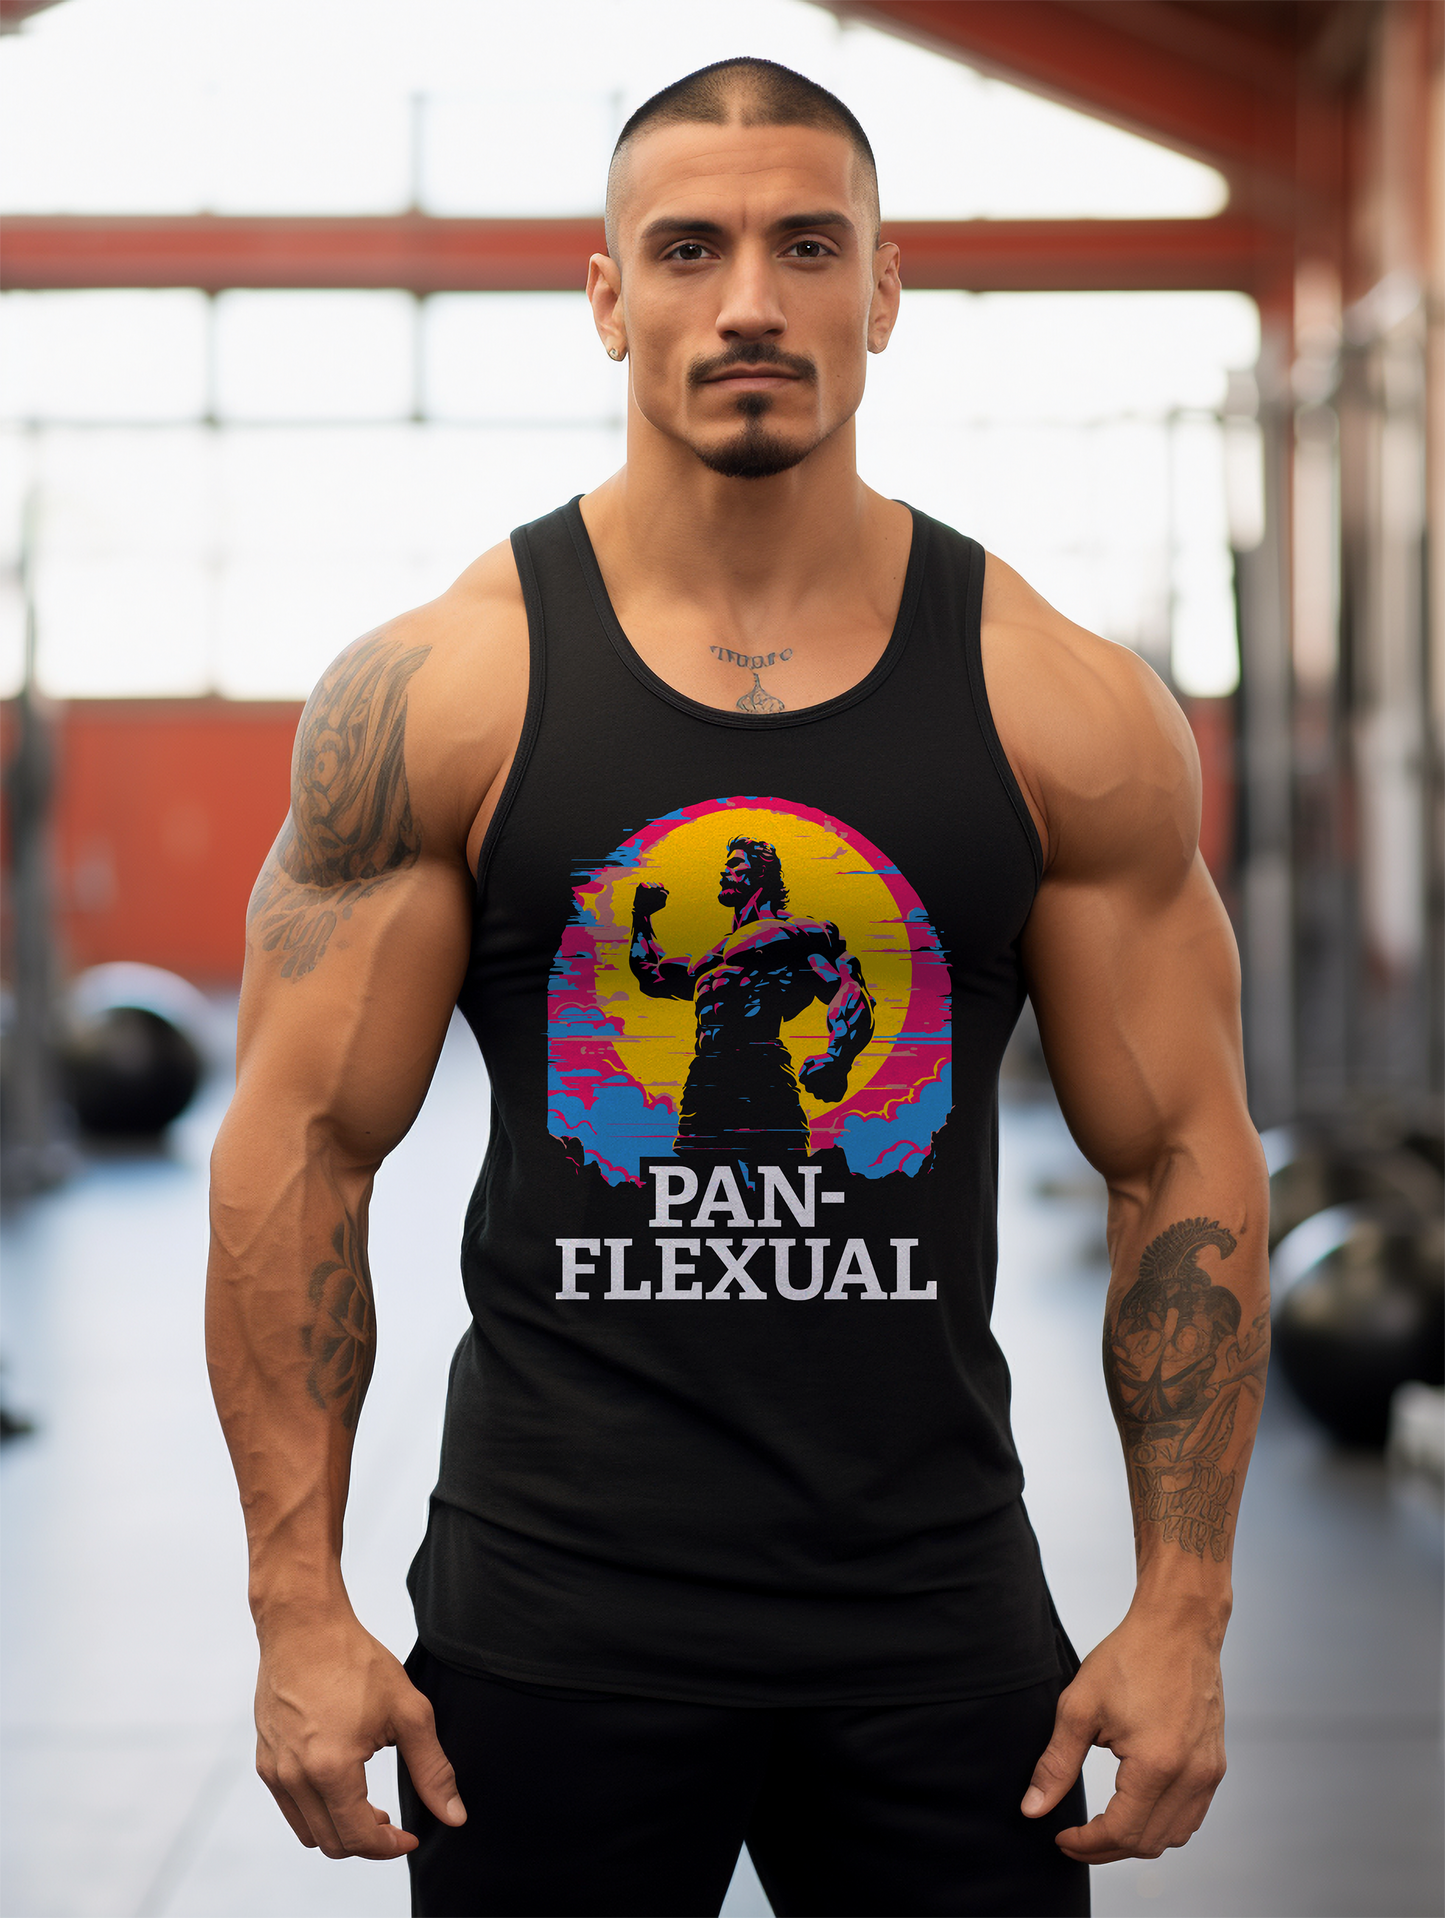 Hispanic muslced bodybuilder wearing a black tank top featuring a graphic with a muscled bodybuilder and the phrase "Pan-Flexual" on it.